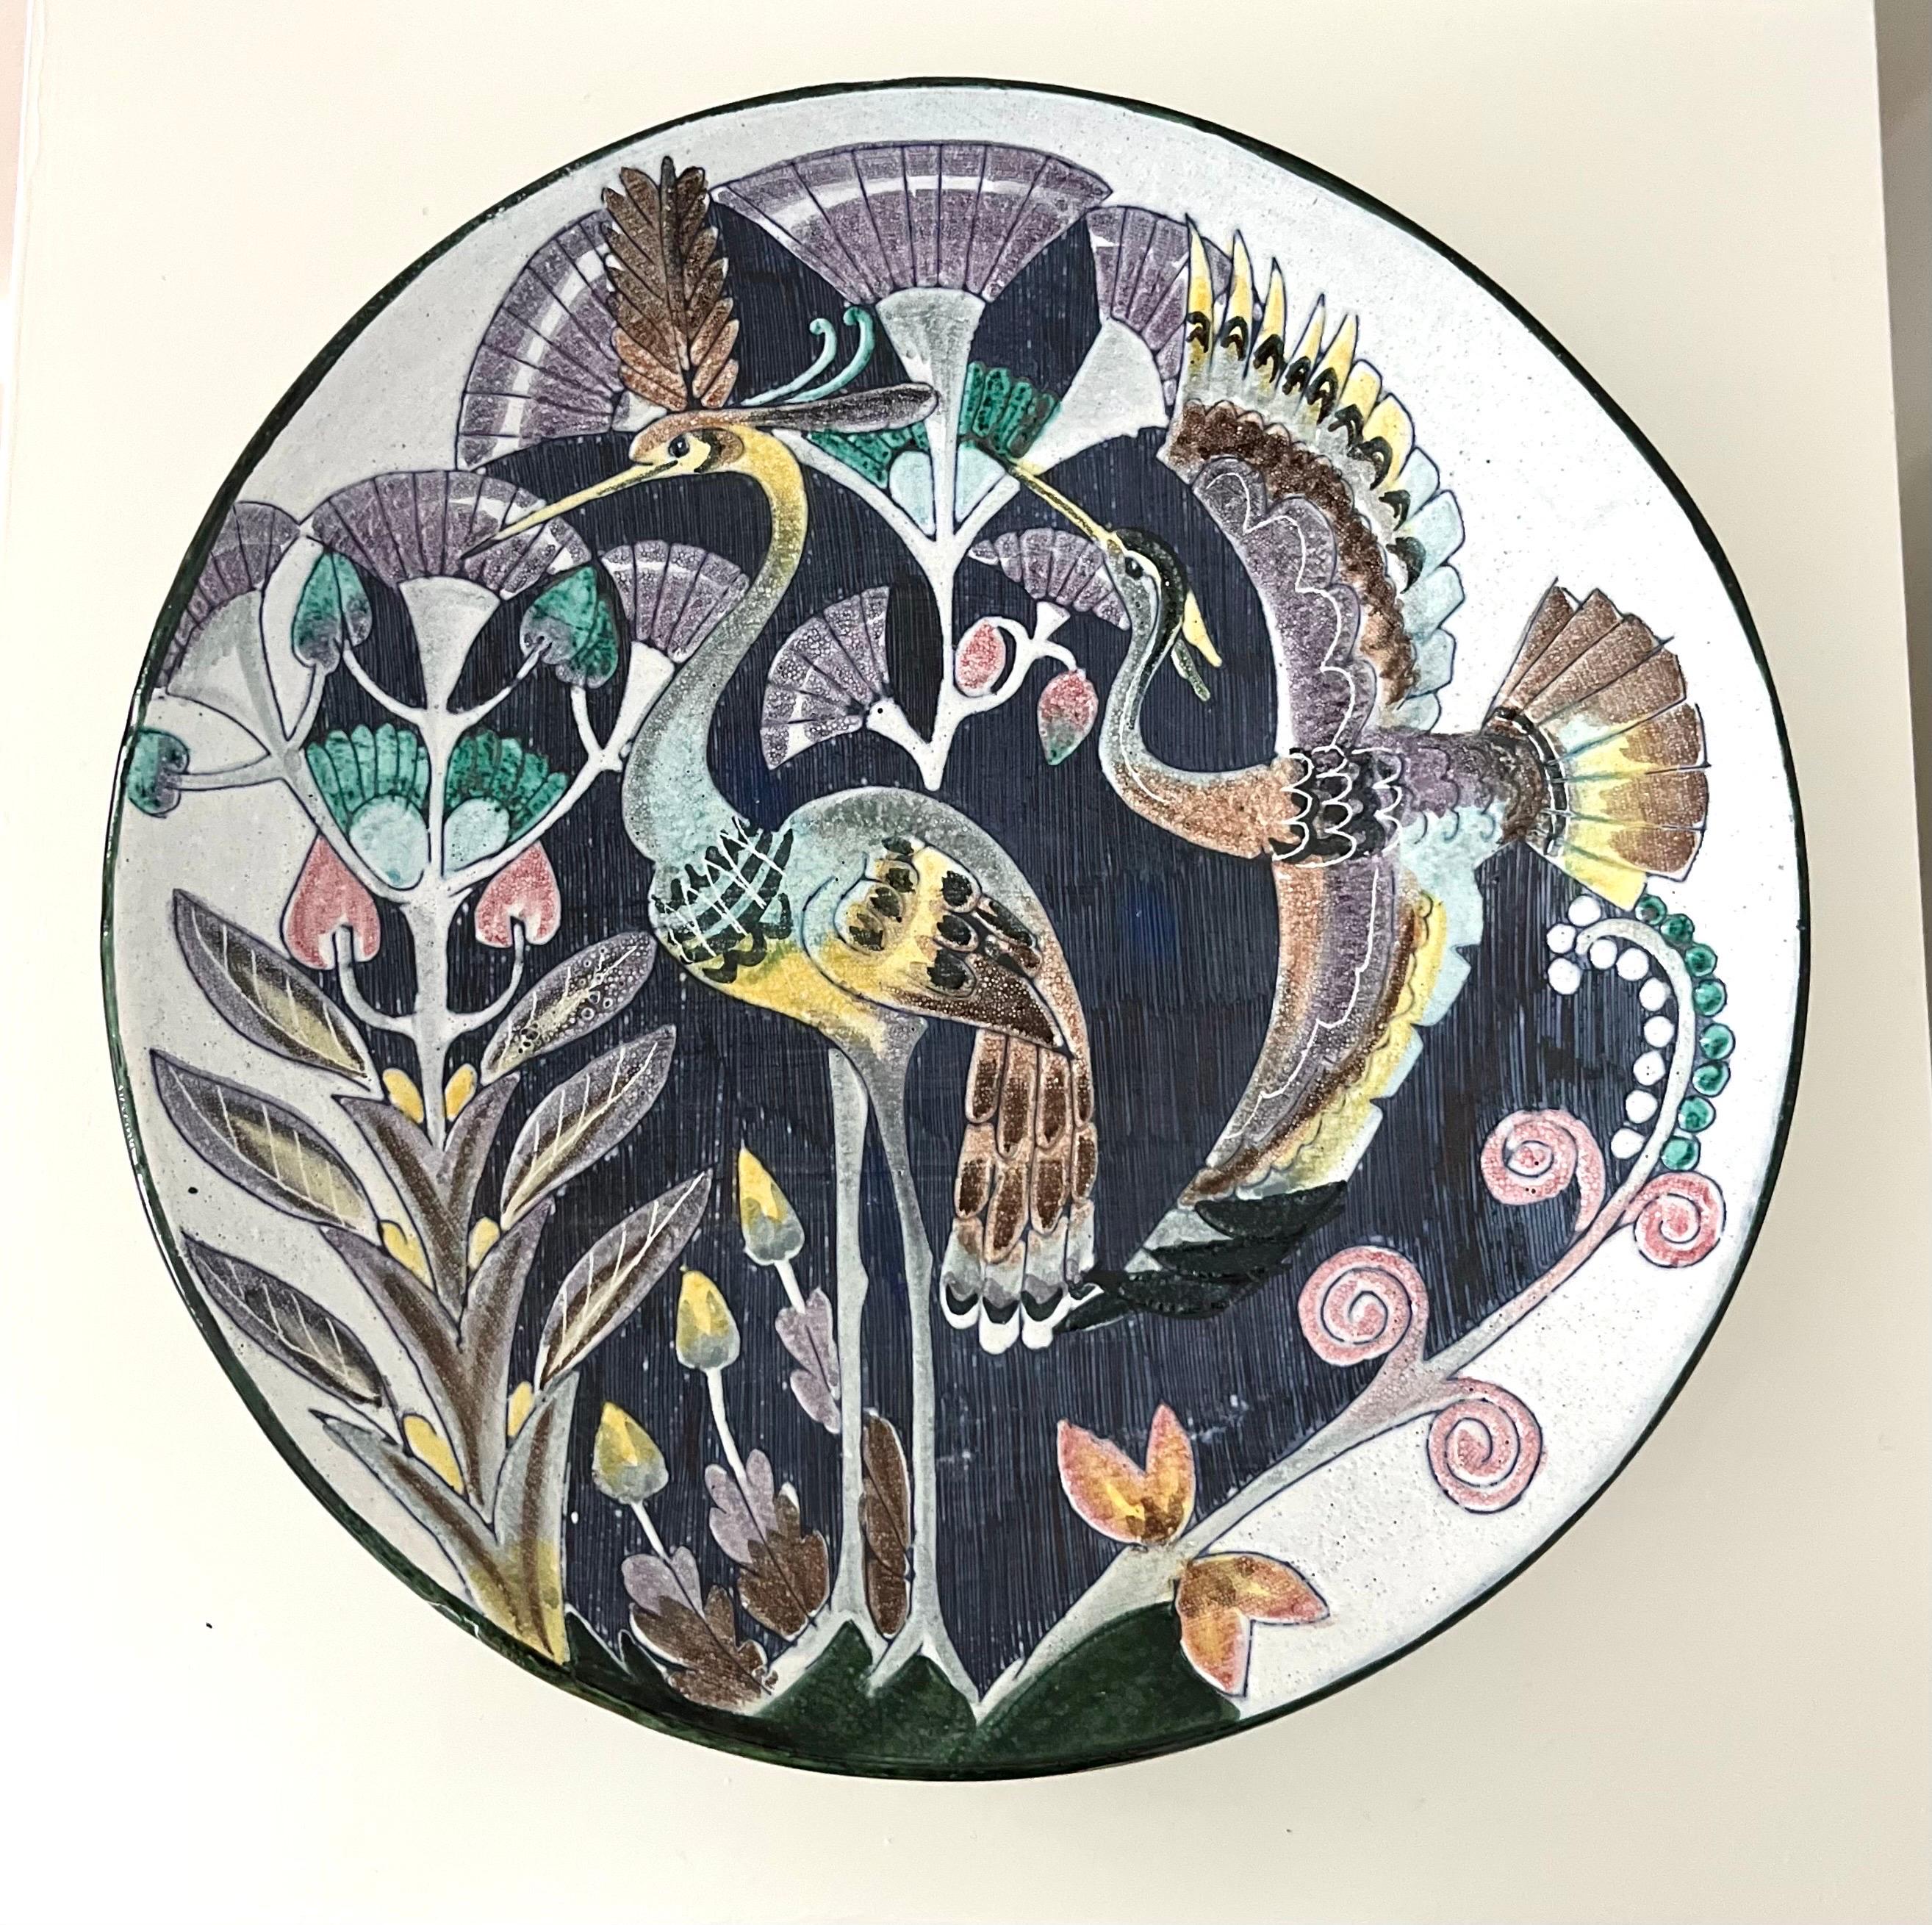 Swedish Modern Tilgmans Ceramic Wall Platter with Swans, 1958

Stunning handmade ceramic piece by Swedish Tilgmans Keramik. Fully glazed hanging wall decoration depicting two elegant birds and long stemmed plants on a cream colored background